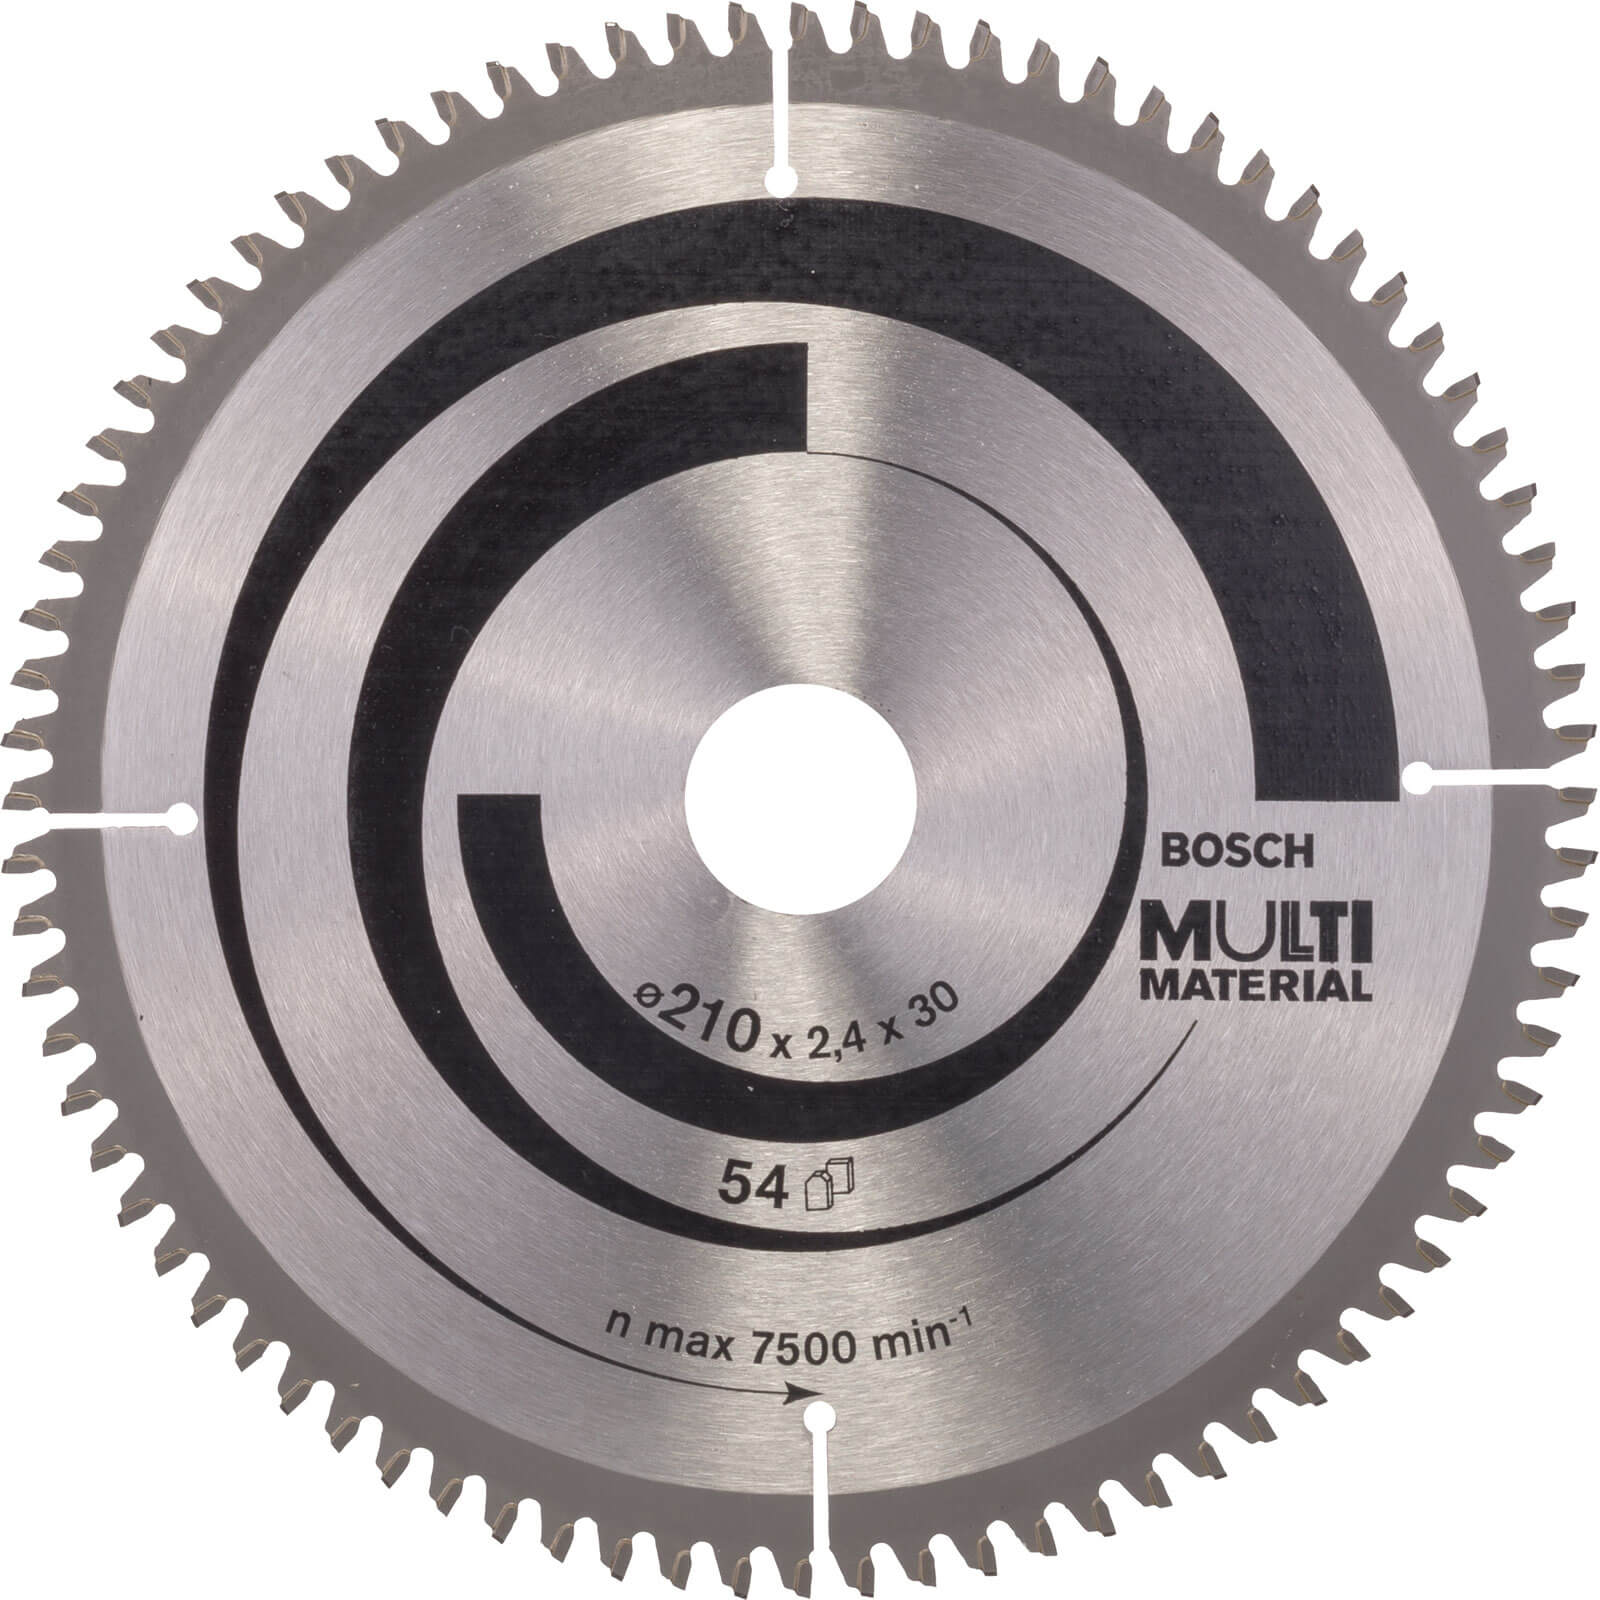 Photos - Power Tool Accessory Bosch Multi Material Cutting Mitre and Table Saw Blade 210mm 80T 30mm 